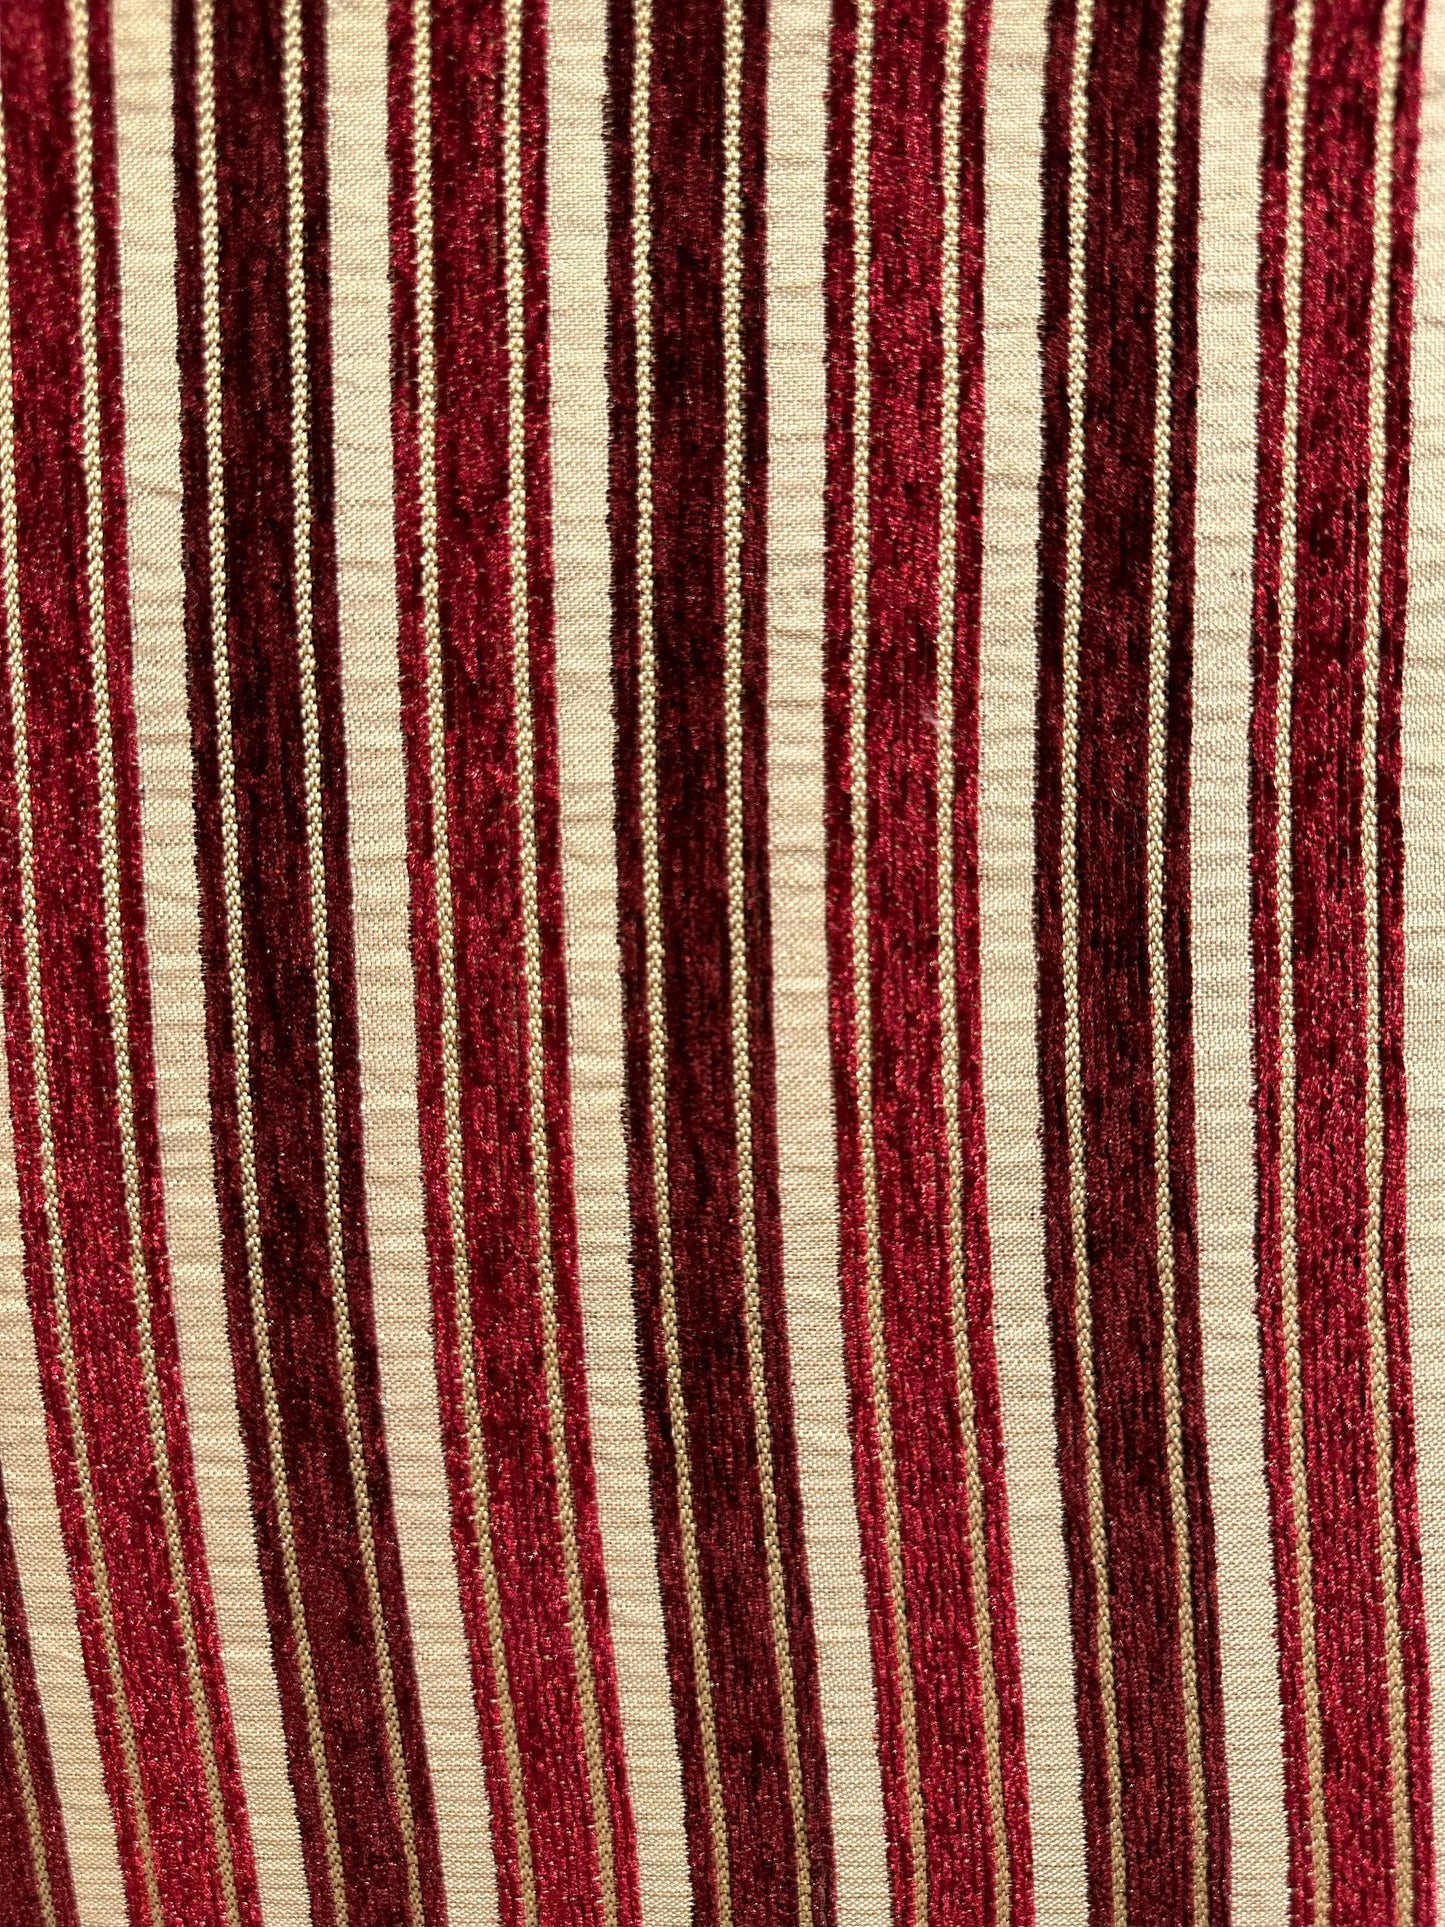 BURGUNDY BEIGE Striped Chenille Upholstery Brocade Fabric (56 in.) Sold By The Yard